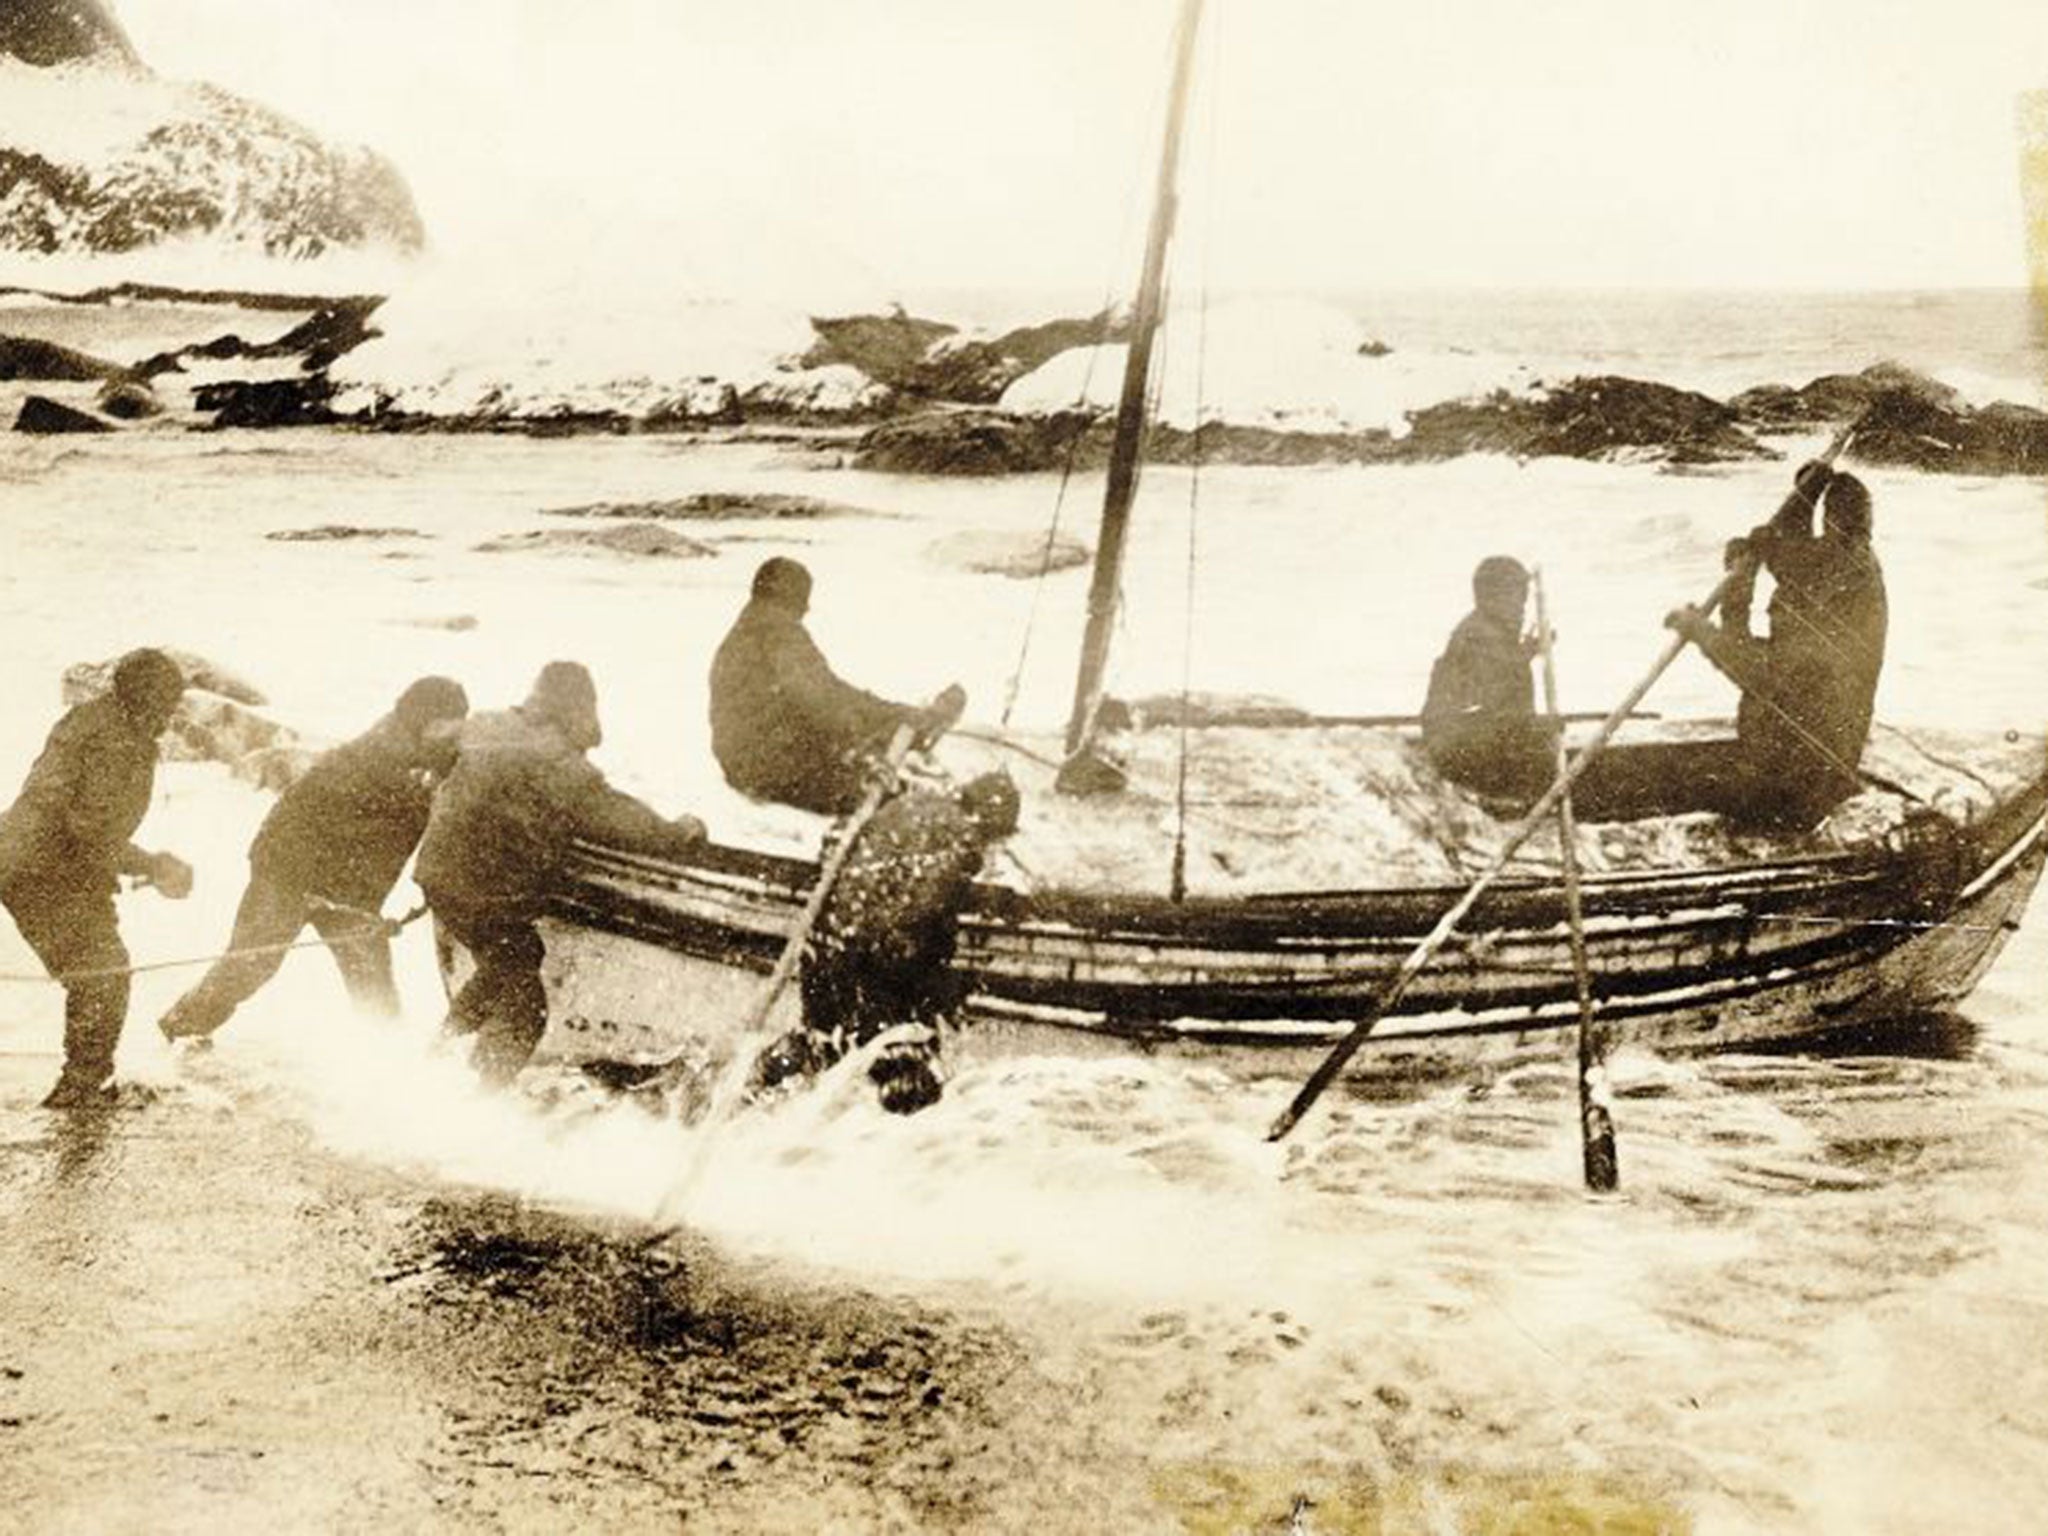 Shackleton with his expedition crew leaving Elephant Island in 1916